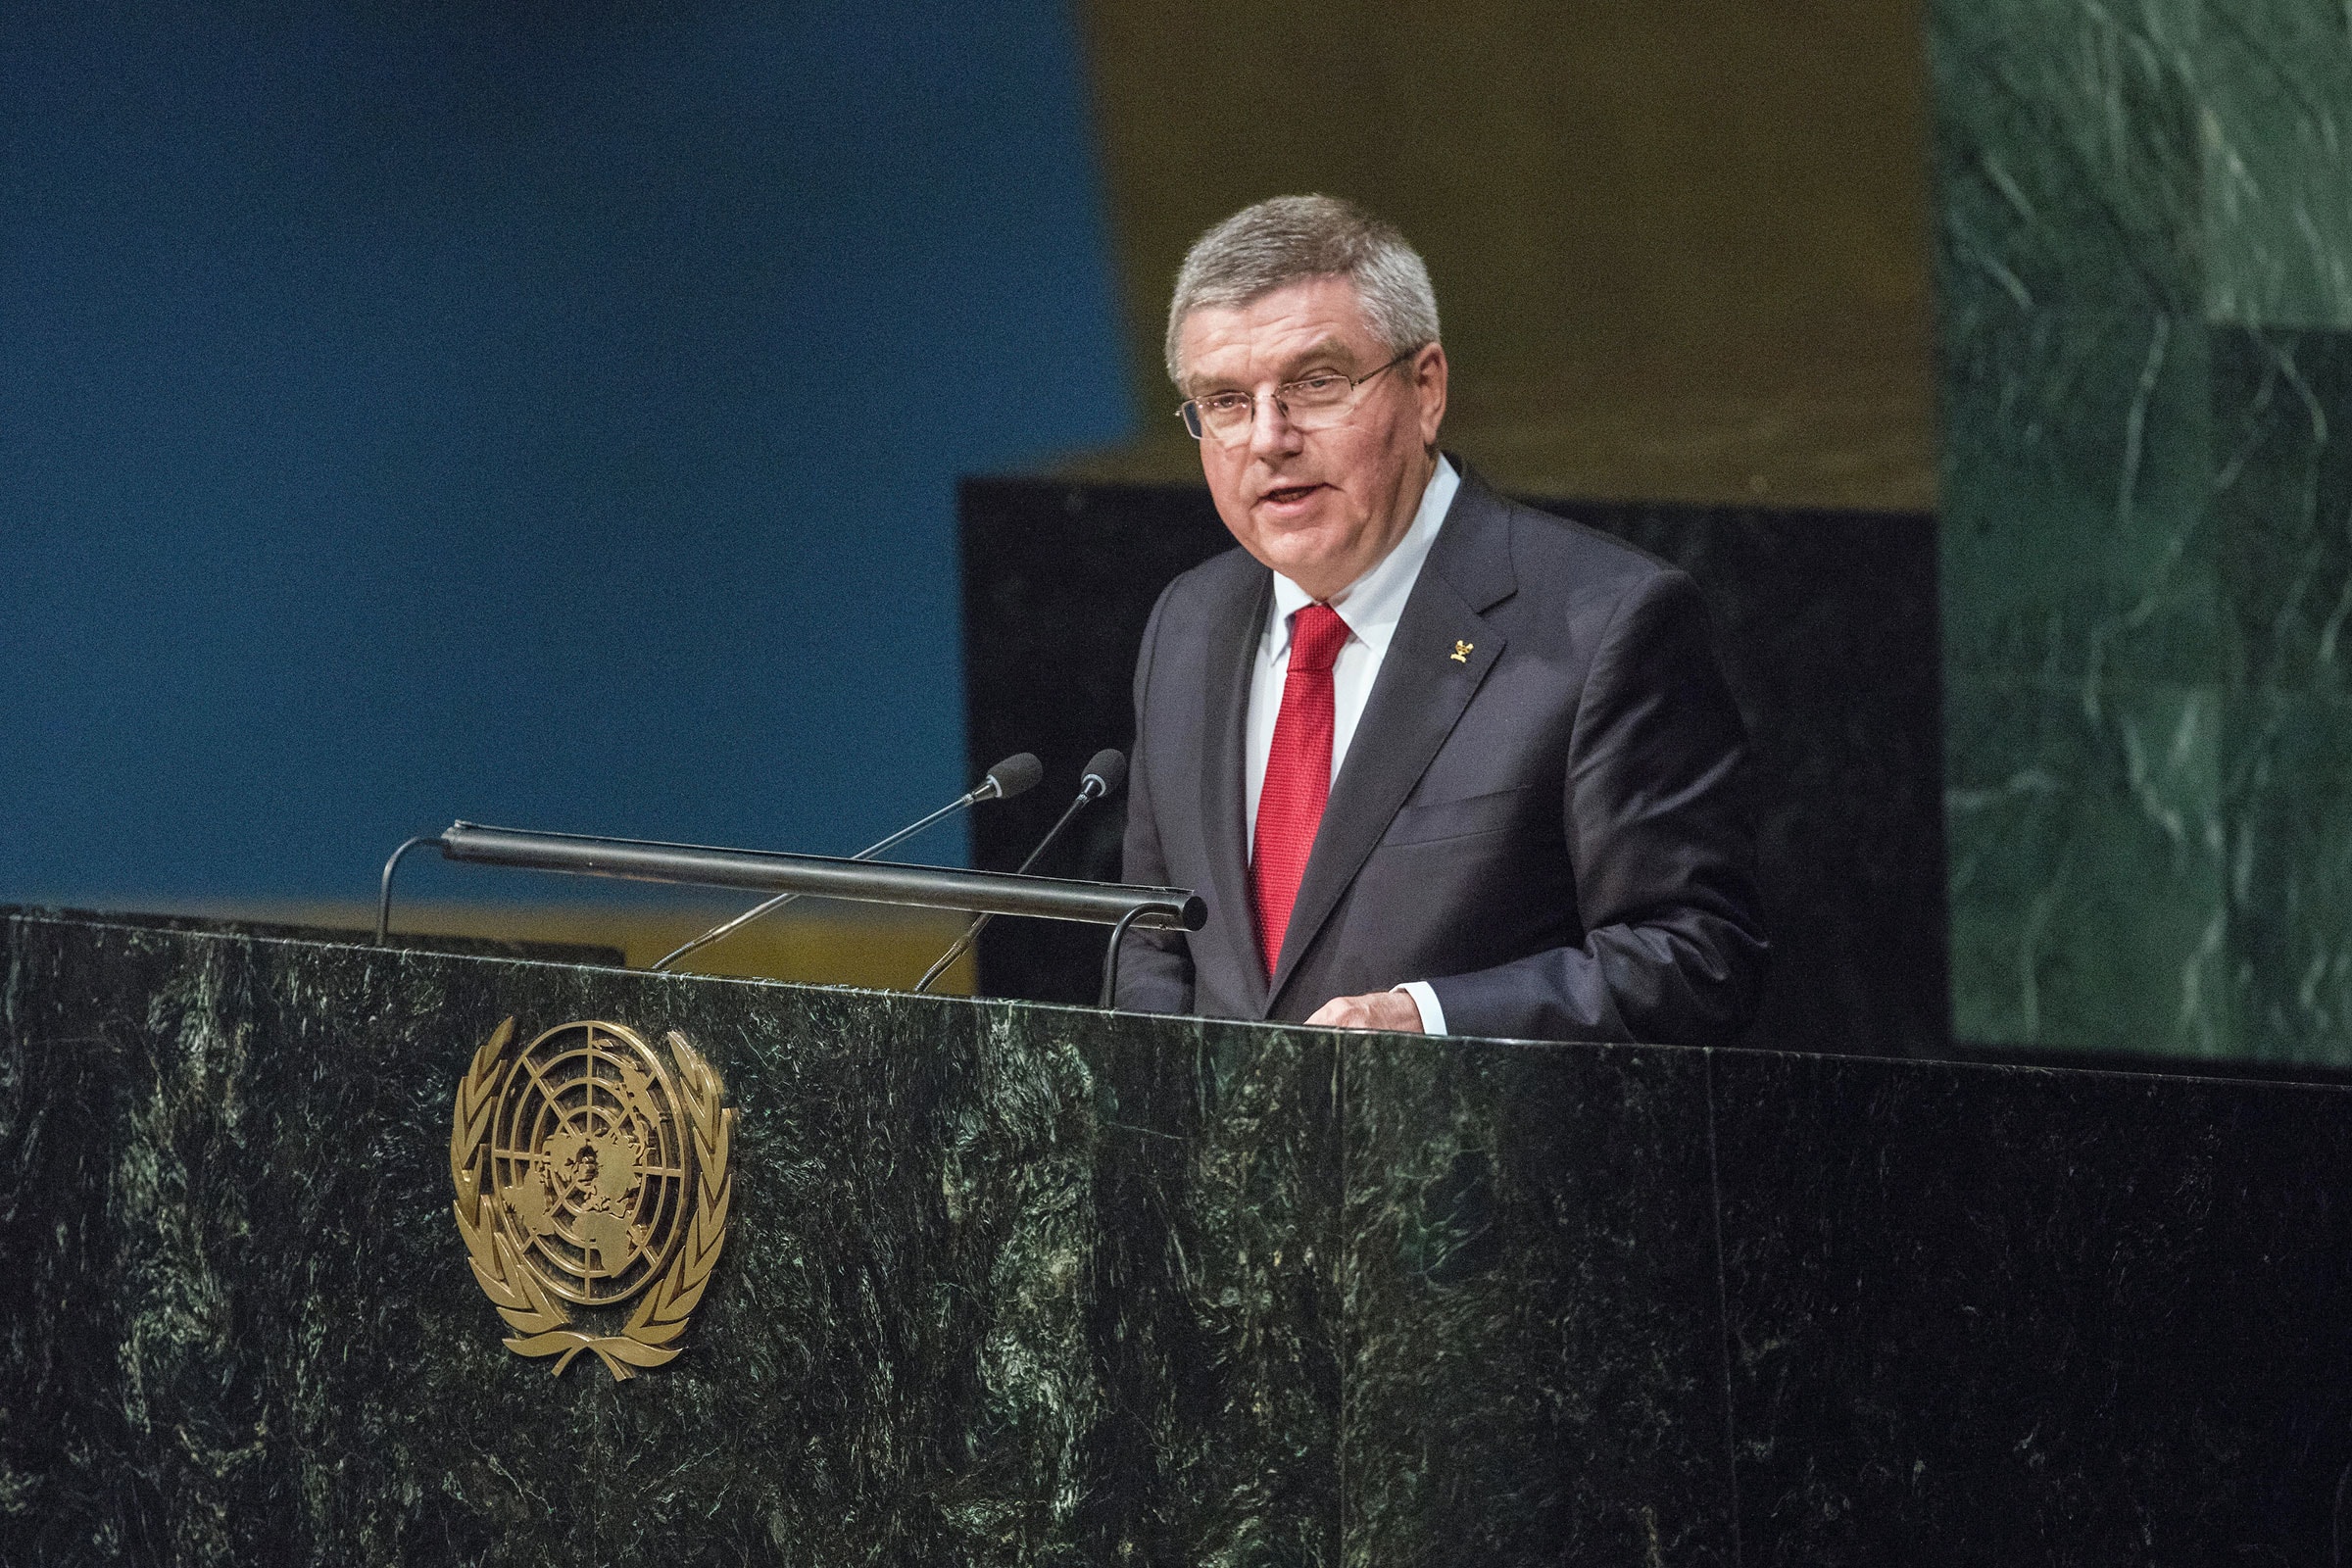 IOC President Thomas Bach  speaking at the United Nations headquarter in New York.